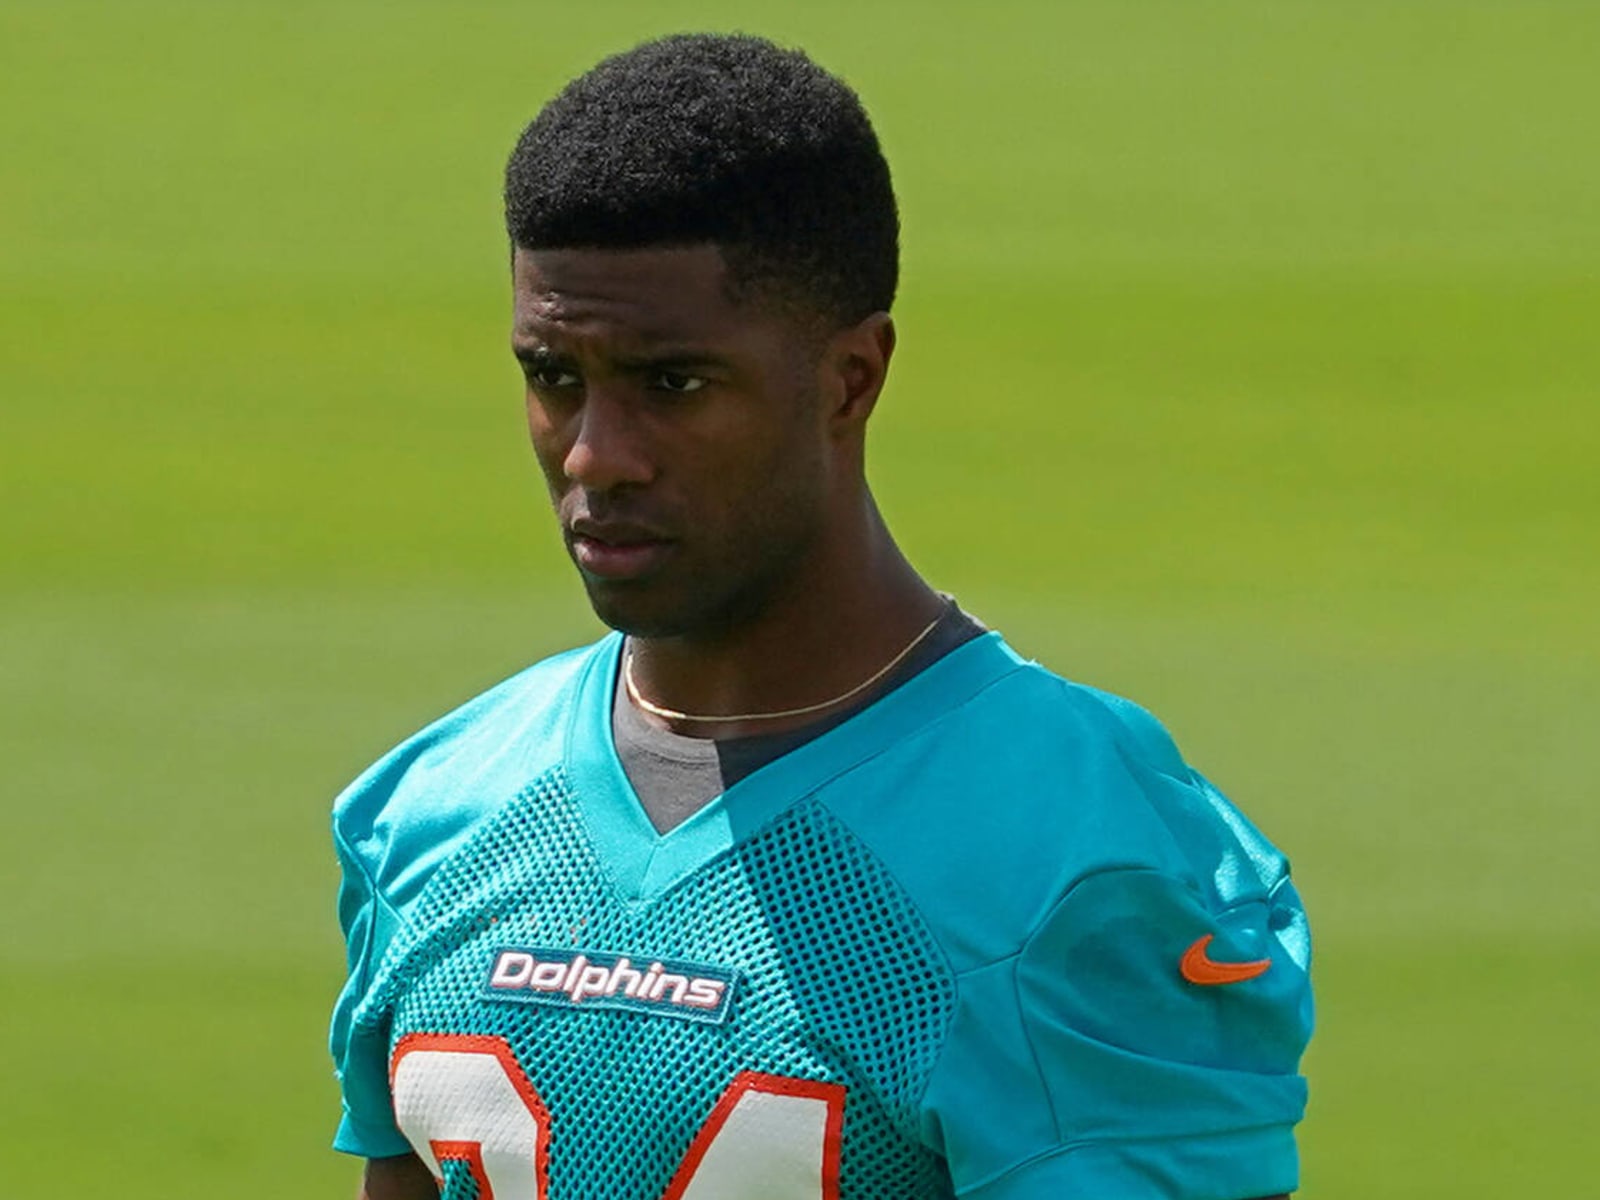 Dolphins' Byron Jones Says He Can't Run or Jump After NFL Injuries